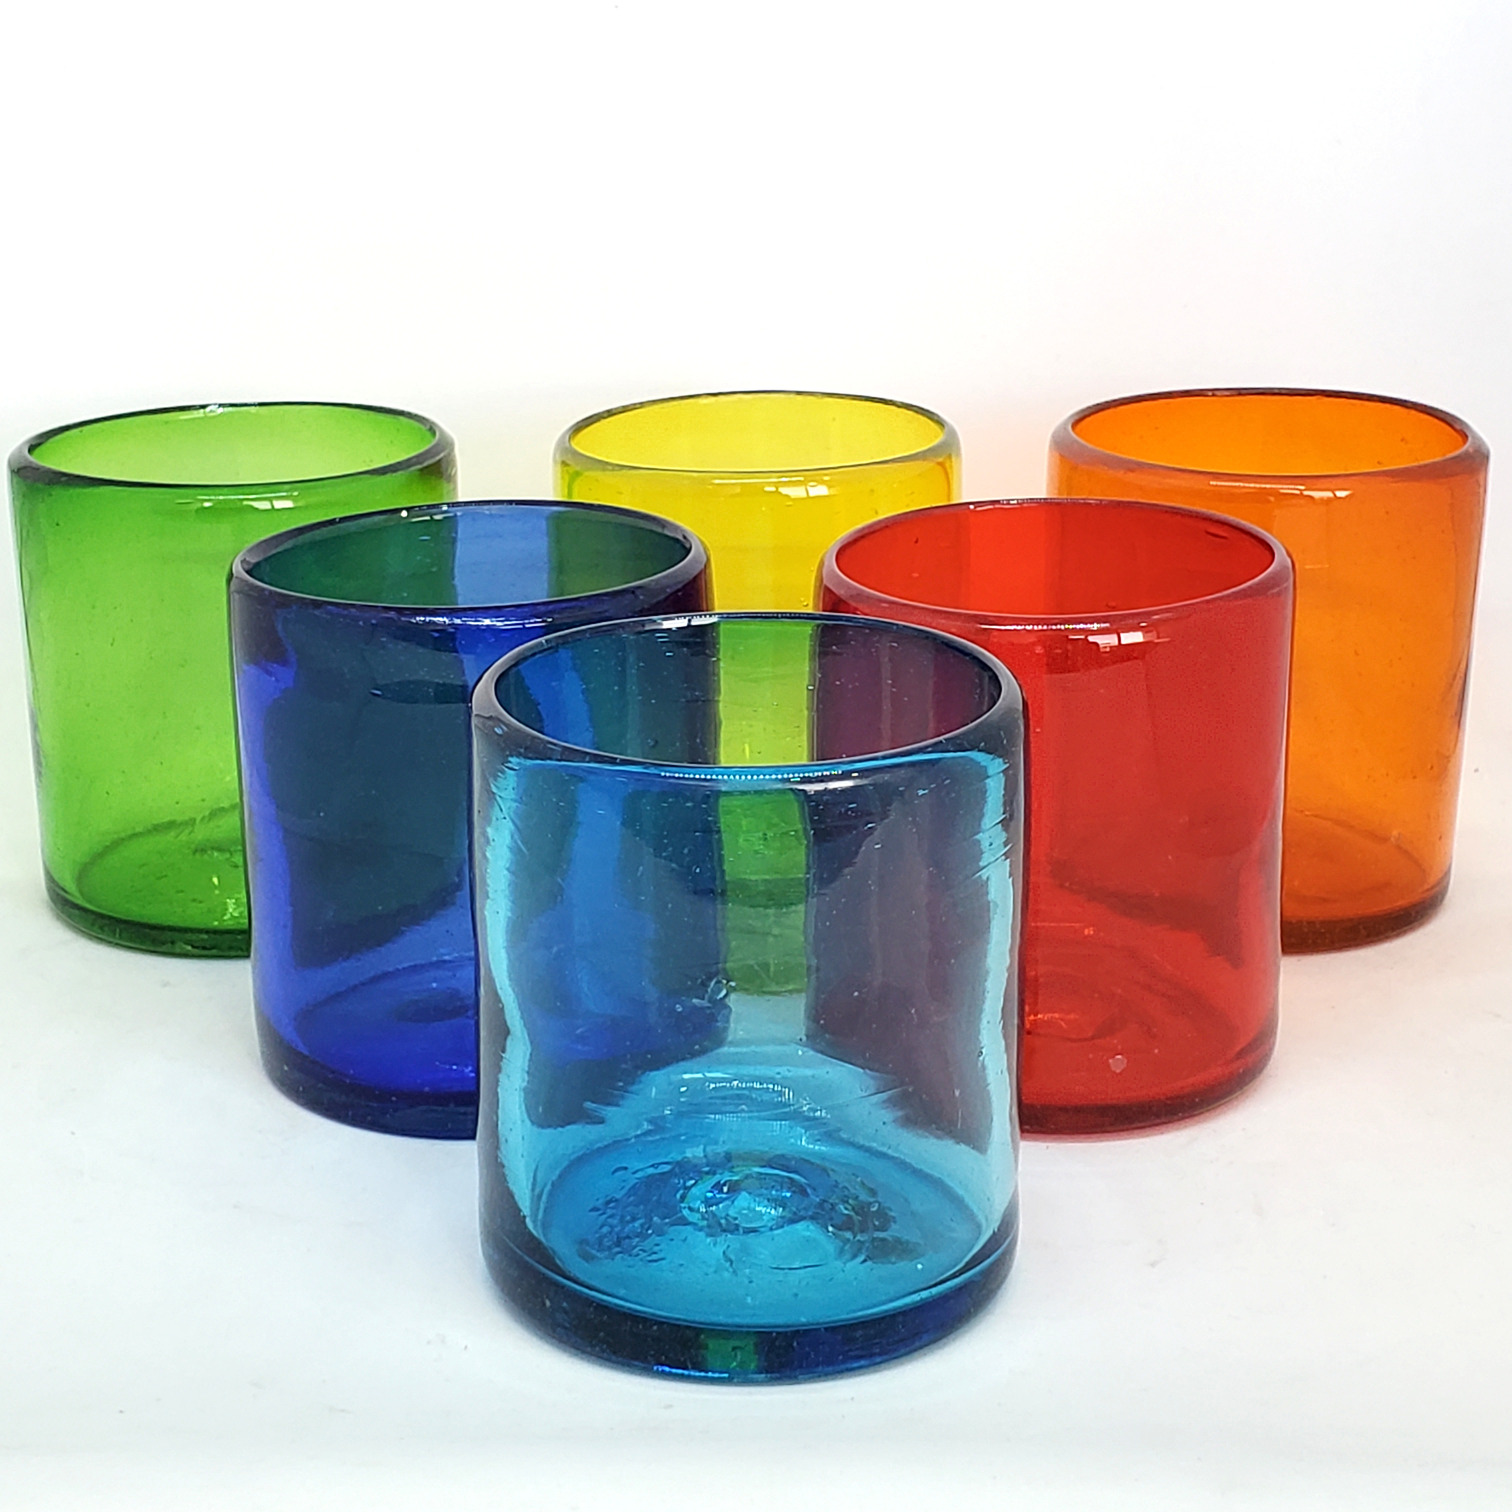 Wholesale MEXICAN GLASSWARE / Rainbow Colored 9 oz Short Tumblers  / Enhance your favorite drink with these colorful handcrafted glasses.